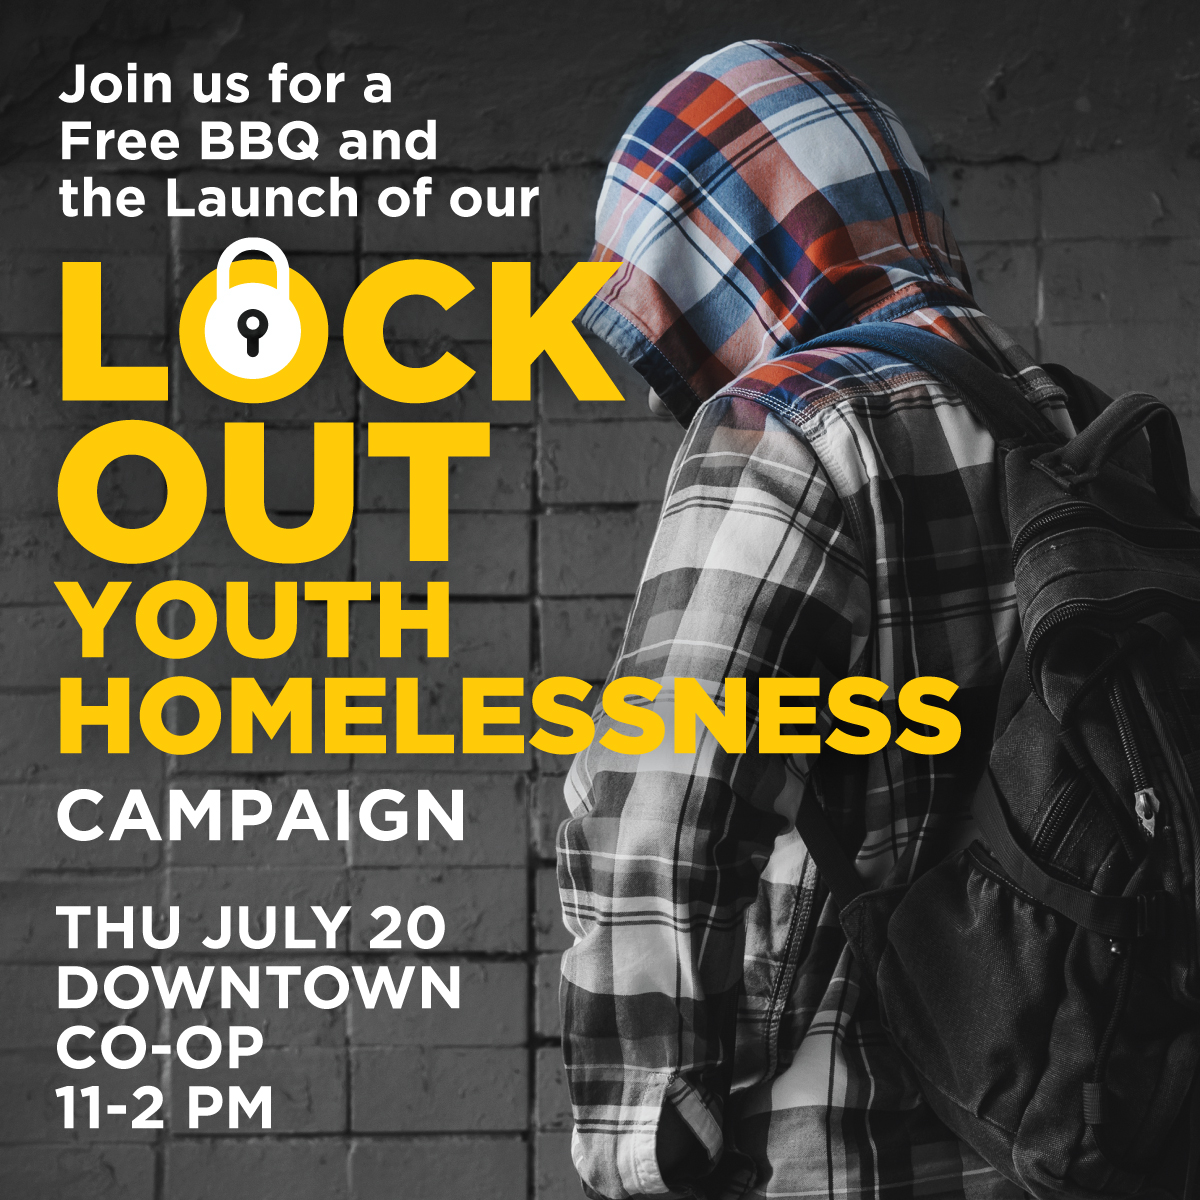 Free BBQ at CO-OP and launch of our Lockout Youth Homelessness Campaign